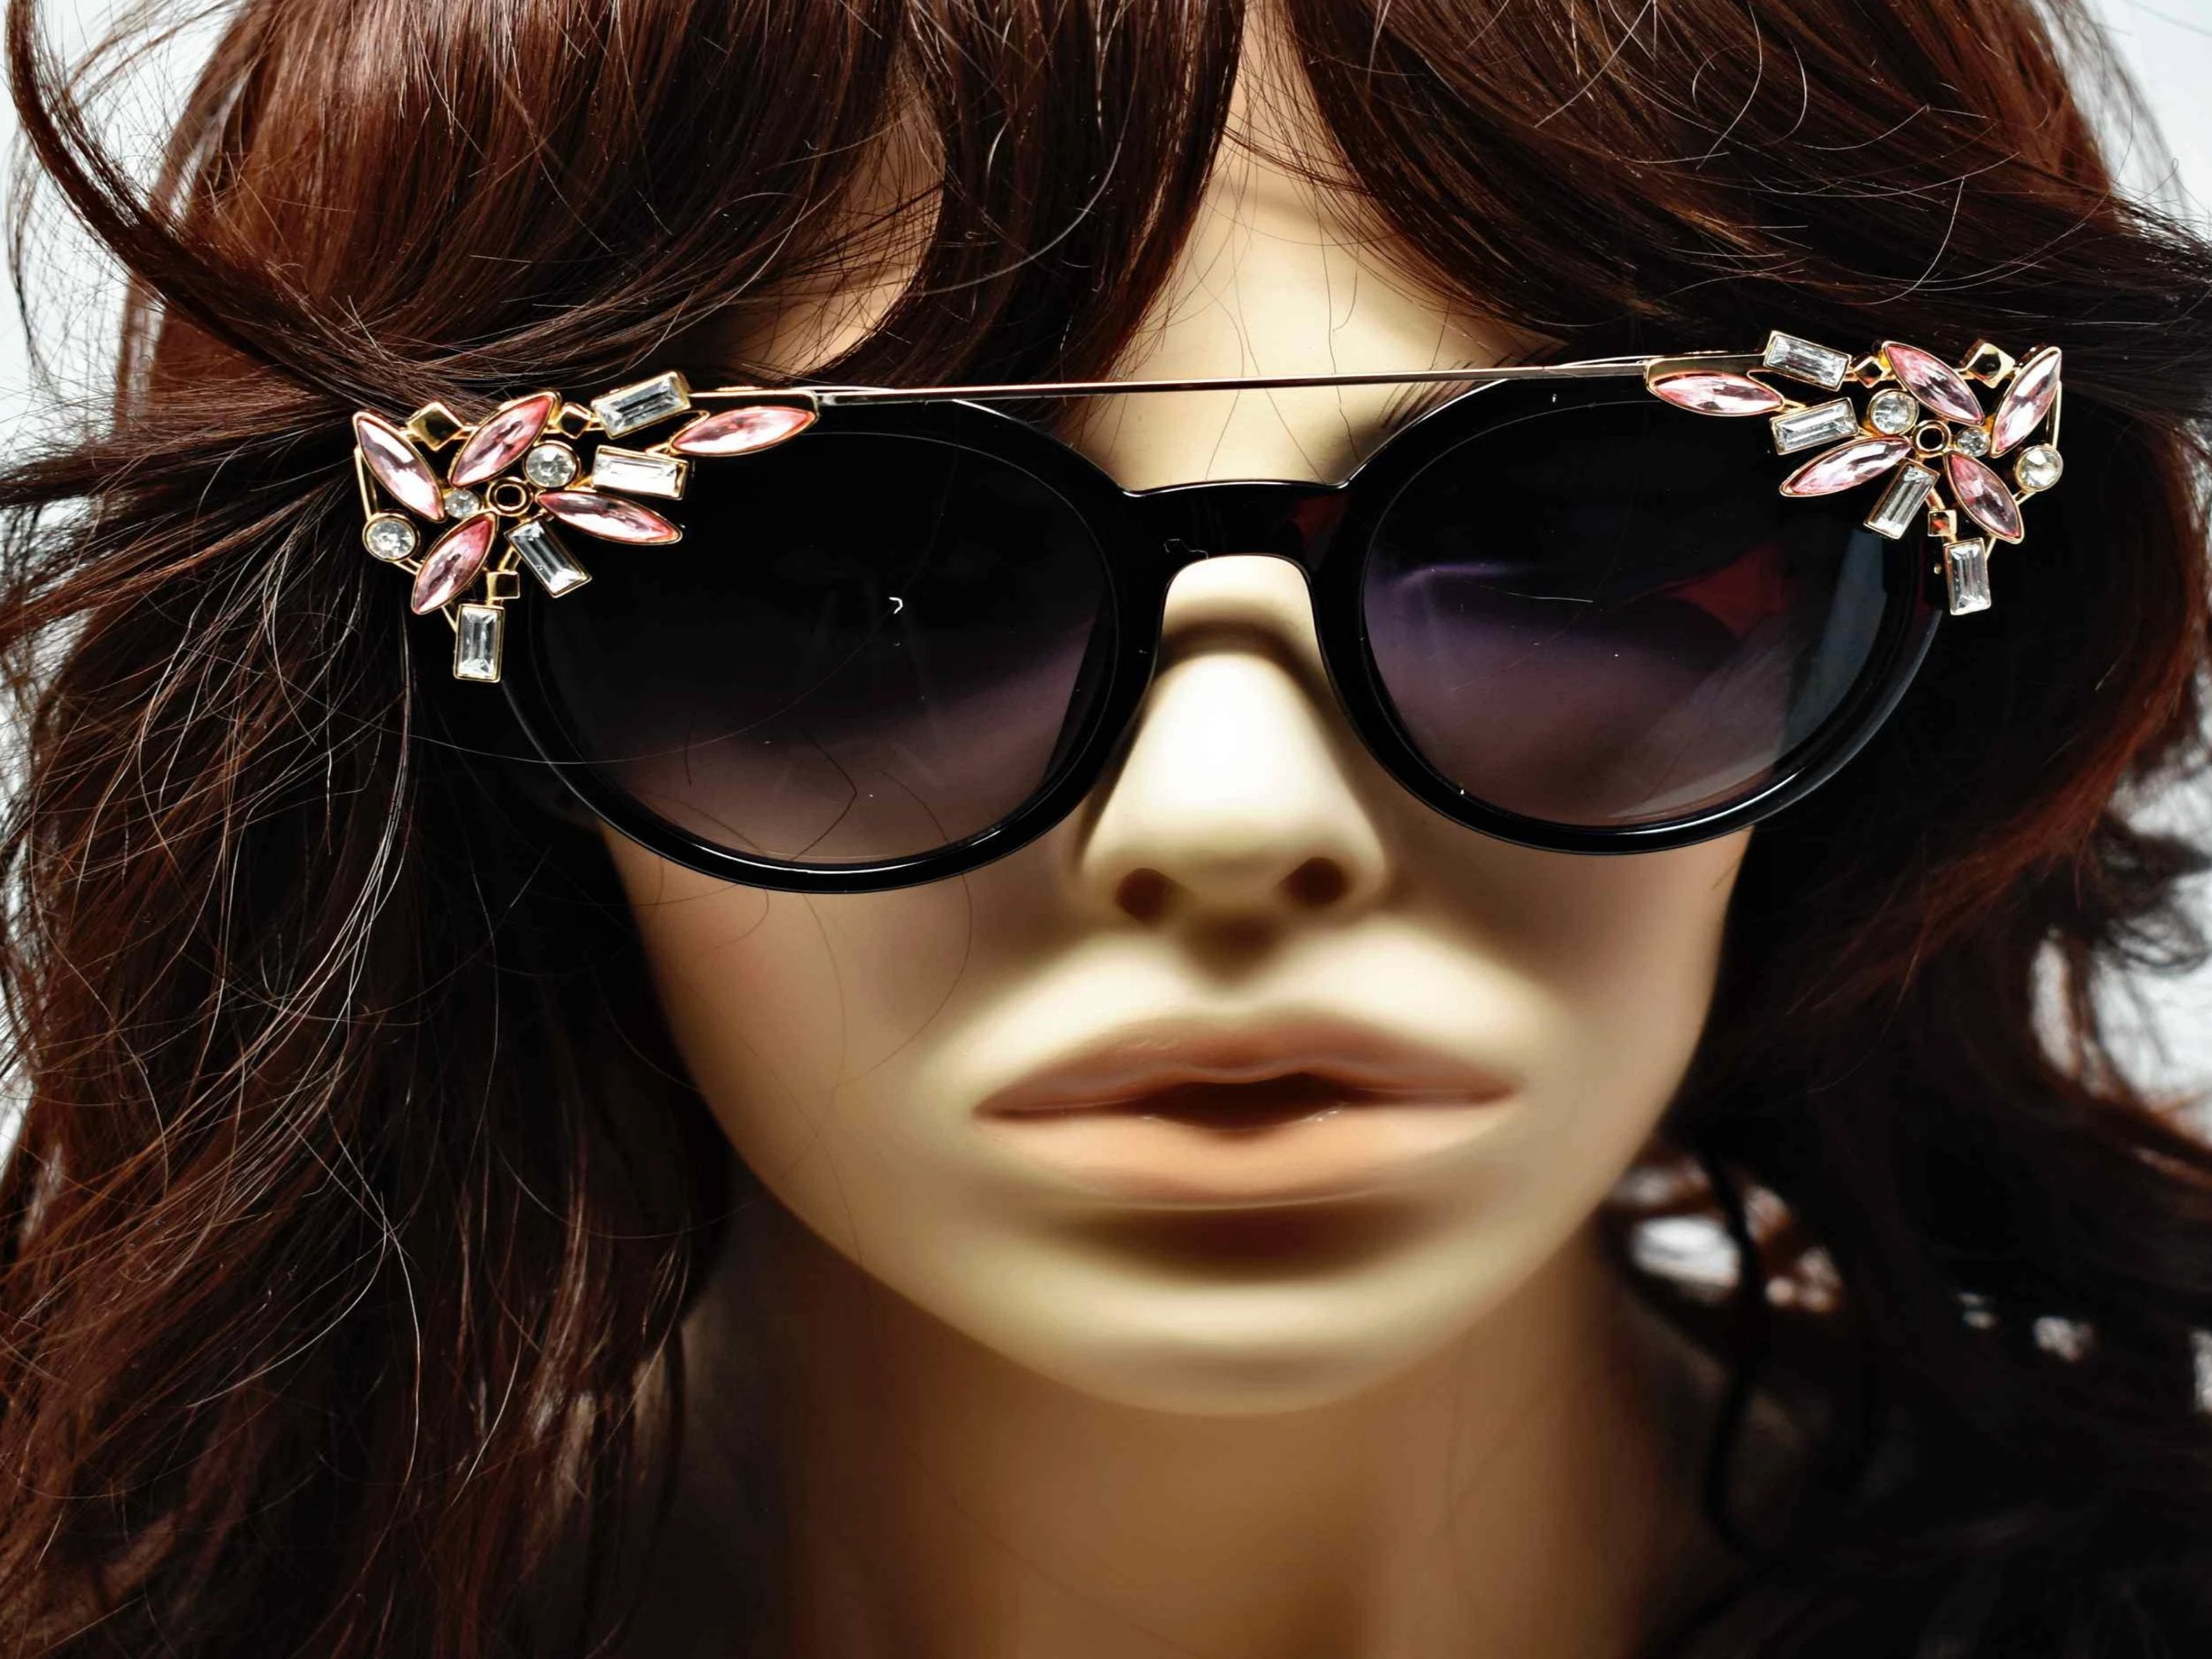 Trend setter and attention getter is what they will call you in these Pansy black sunglasses with a sleek gold trim adorned in pink and clear gems, in a pantos style frame.